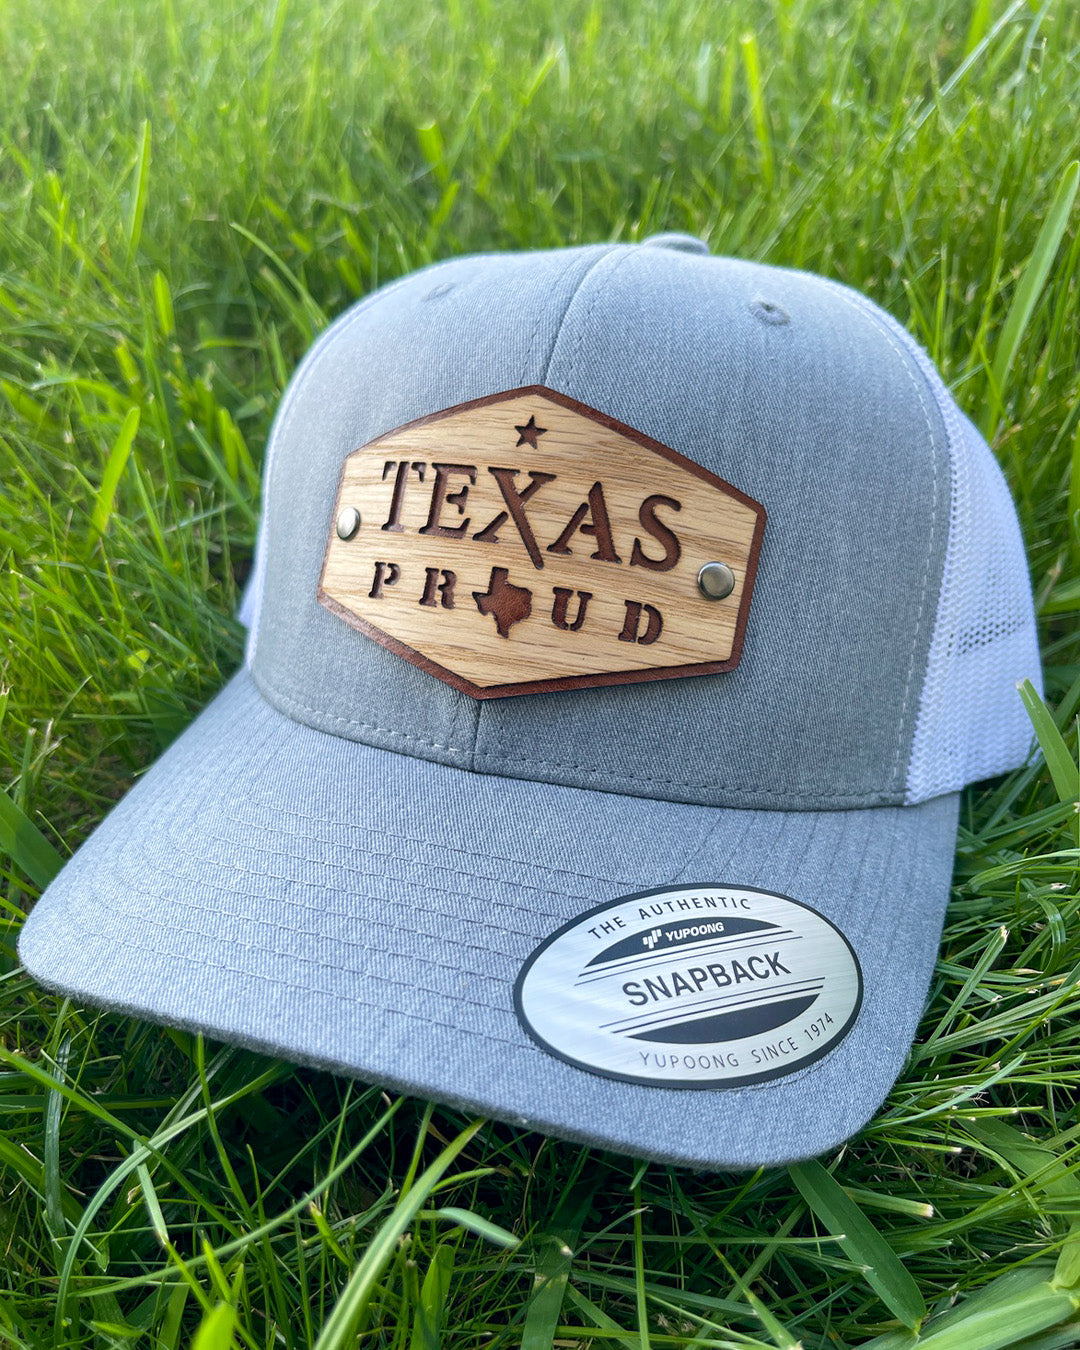 Cheap Embroidery Custom Hats Original Texas Proud Edition Real Wood & Leather Patch Hat Retro Trucker Mesh Cap